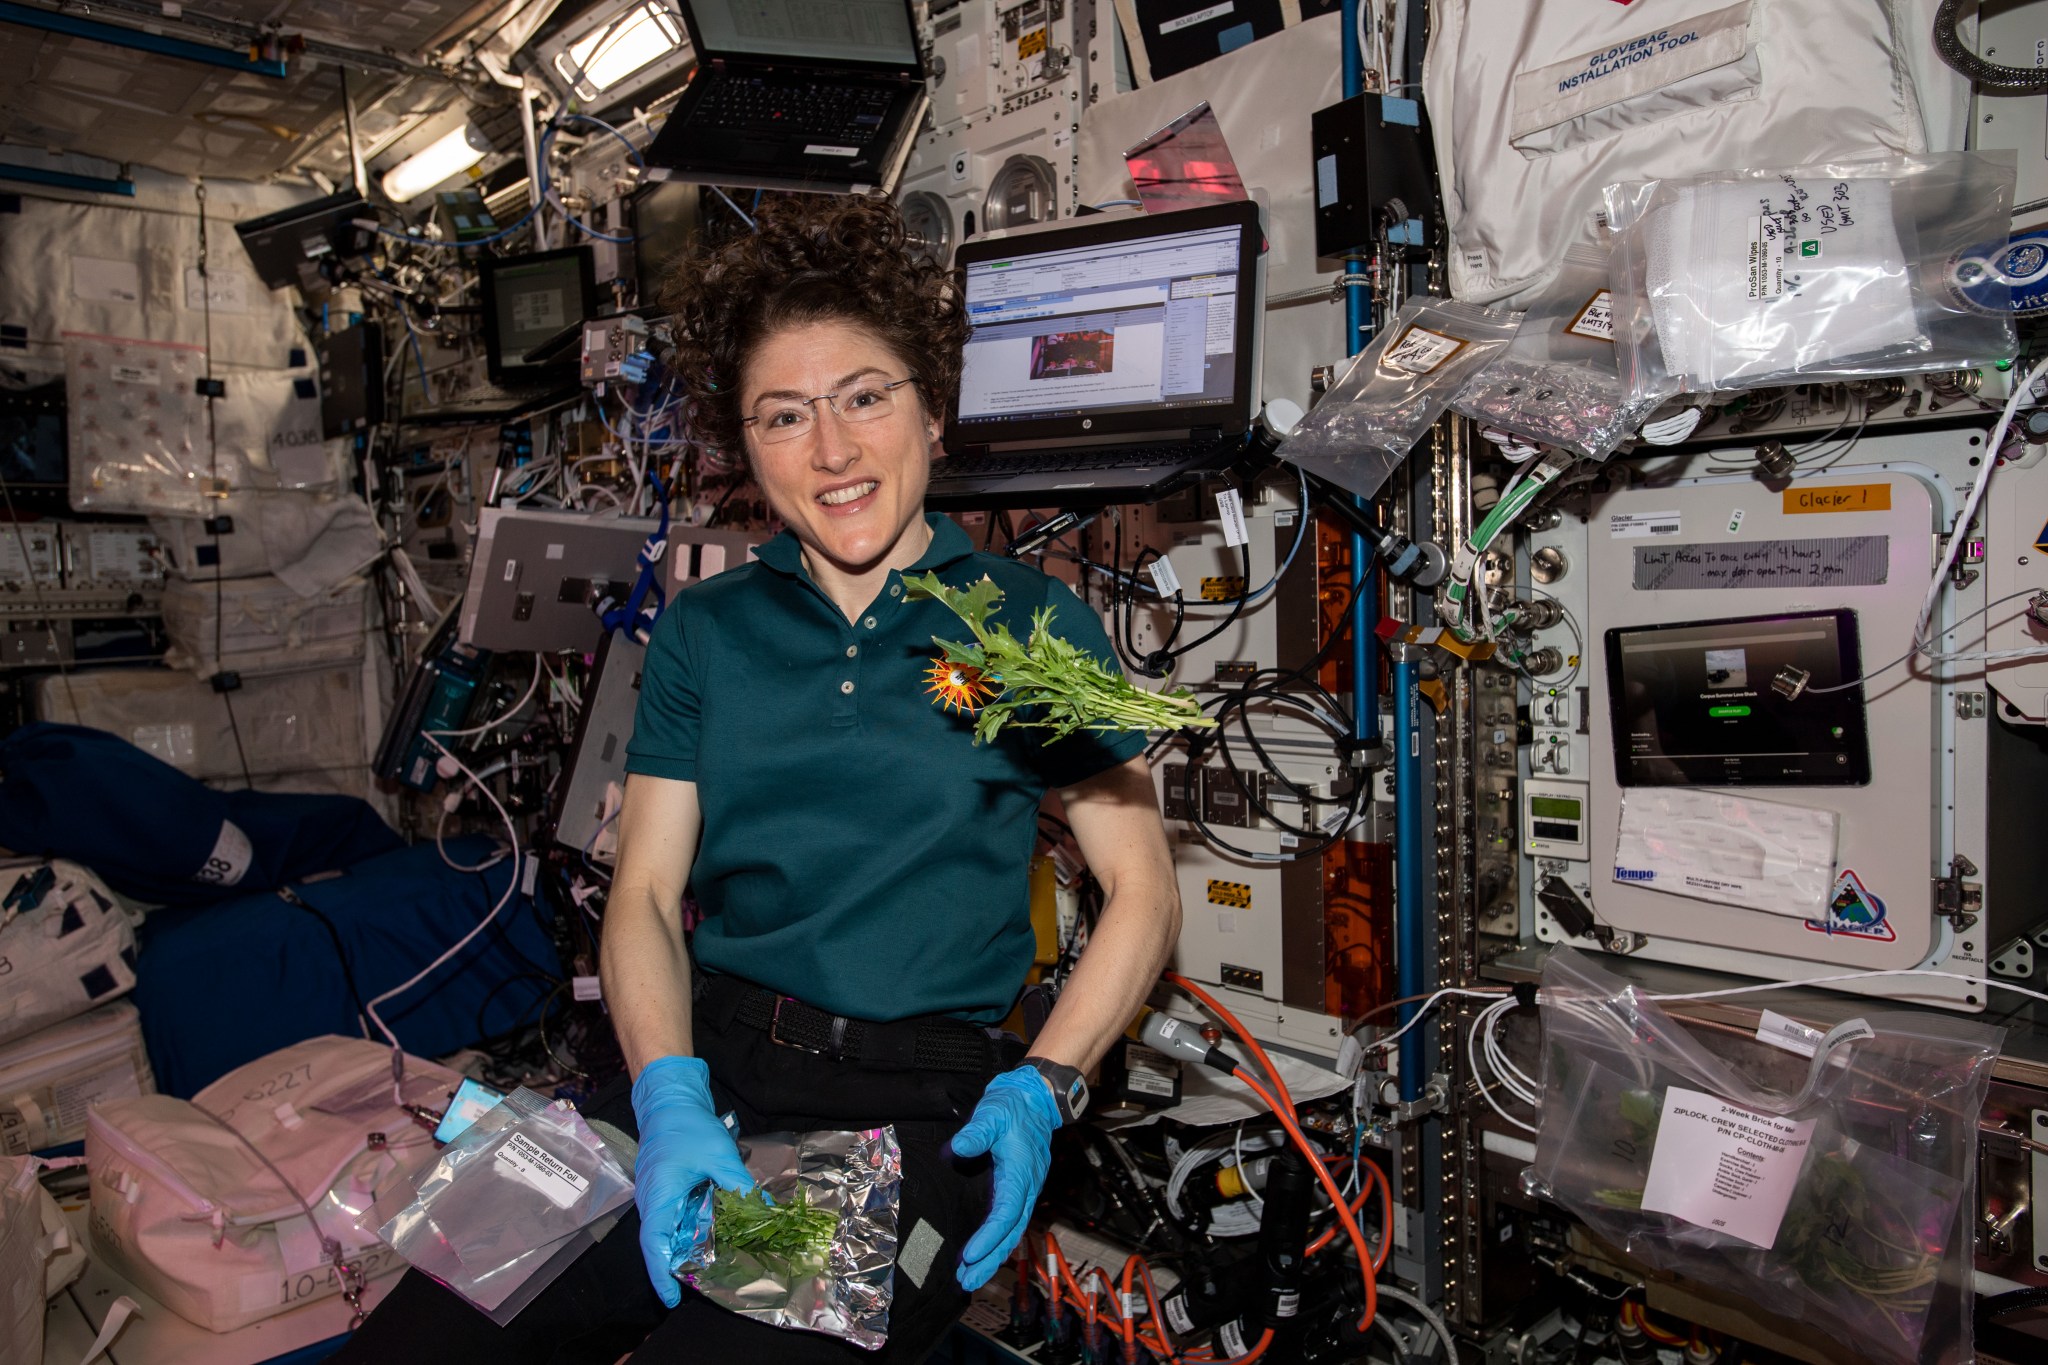  NASA astronaut Christina Koch collects and packs Mizuna mustard greens grown & harvested inside the International Space Station